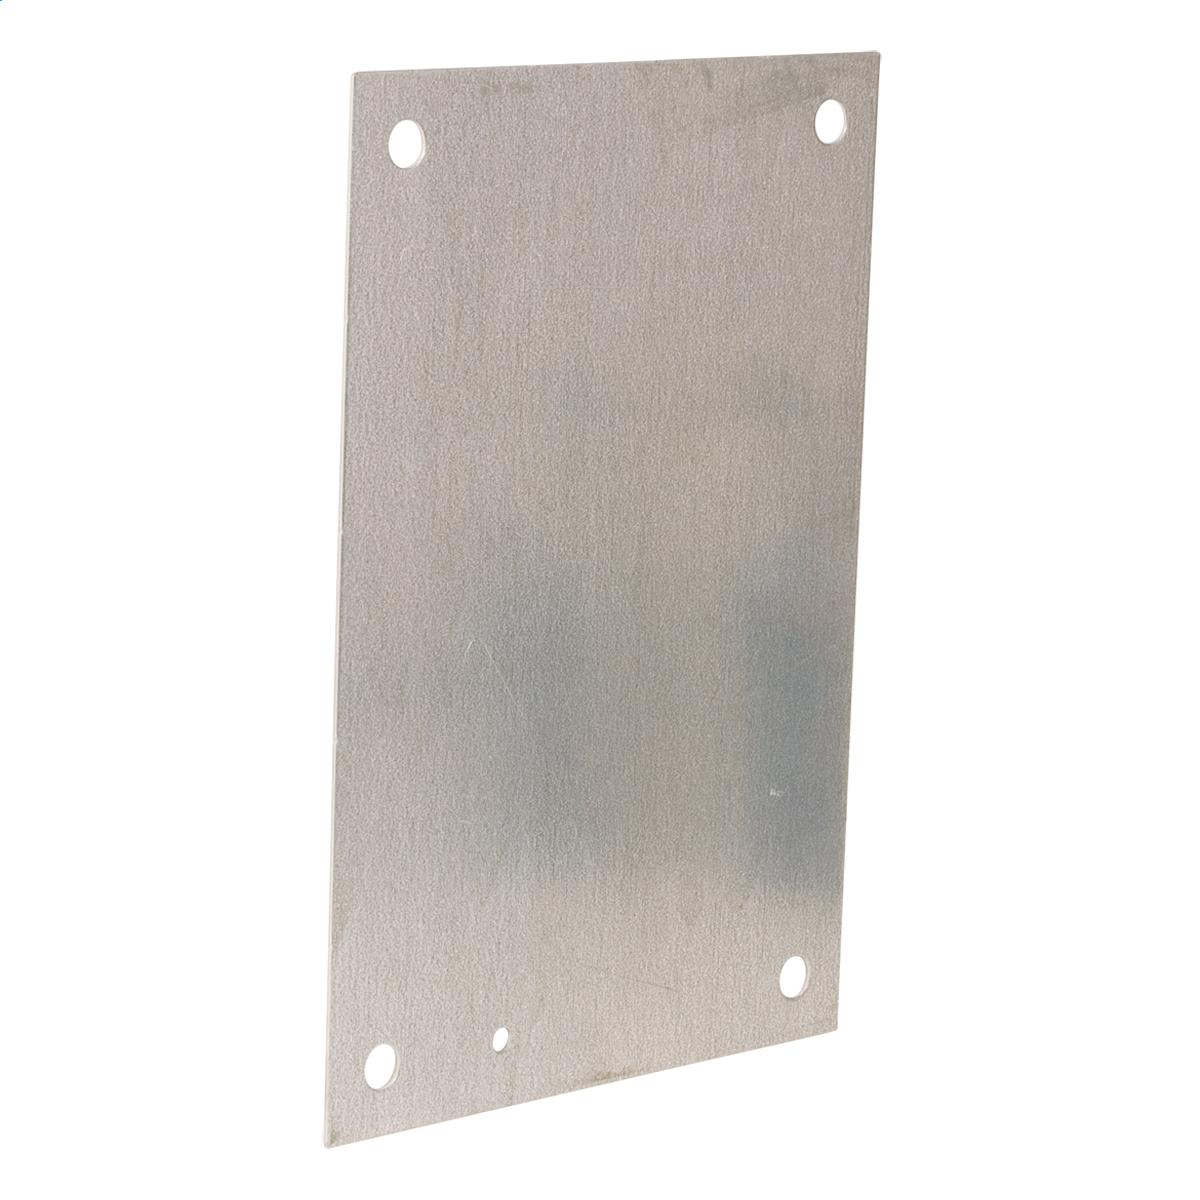 Hubbell NP1224G Back Panel (N1/3R/4/12) 9X21 Carbon Steel - Galvanized  ; Fabricated from pre-galvanized steel ; Panels mount to provided collar studs ; Galvanized panels are 12 gauge. Panel with any side over 20.00" has 3/4" flange on all sides. Optional "G" panels have